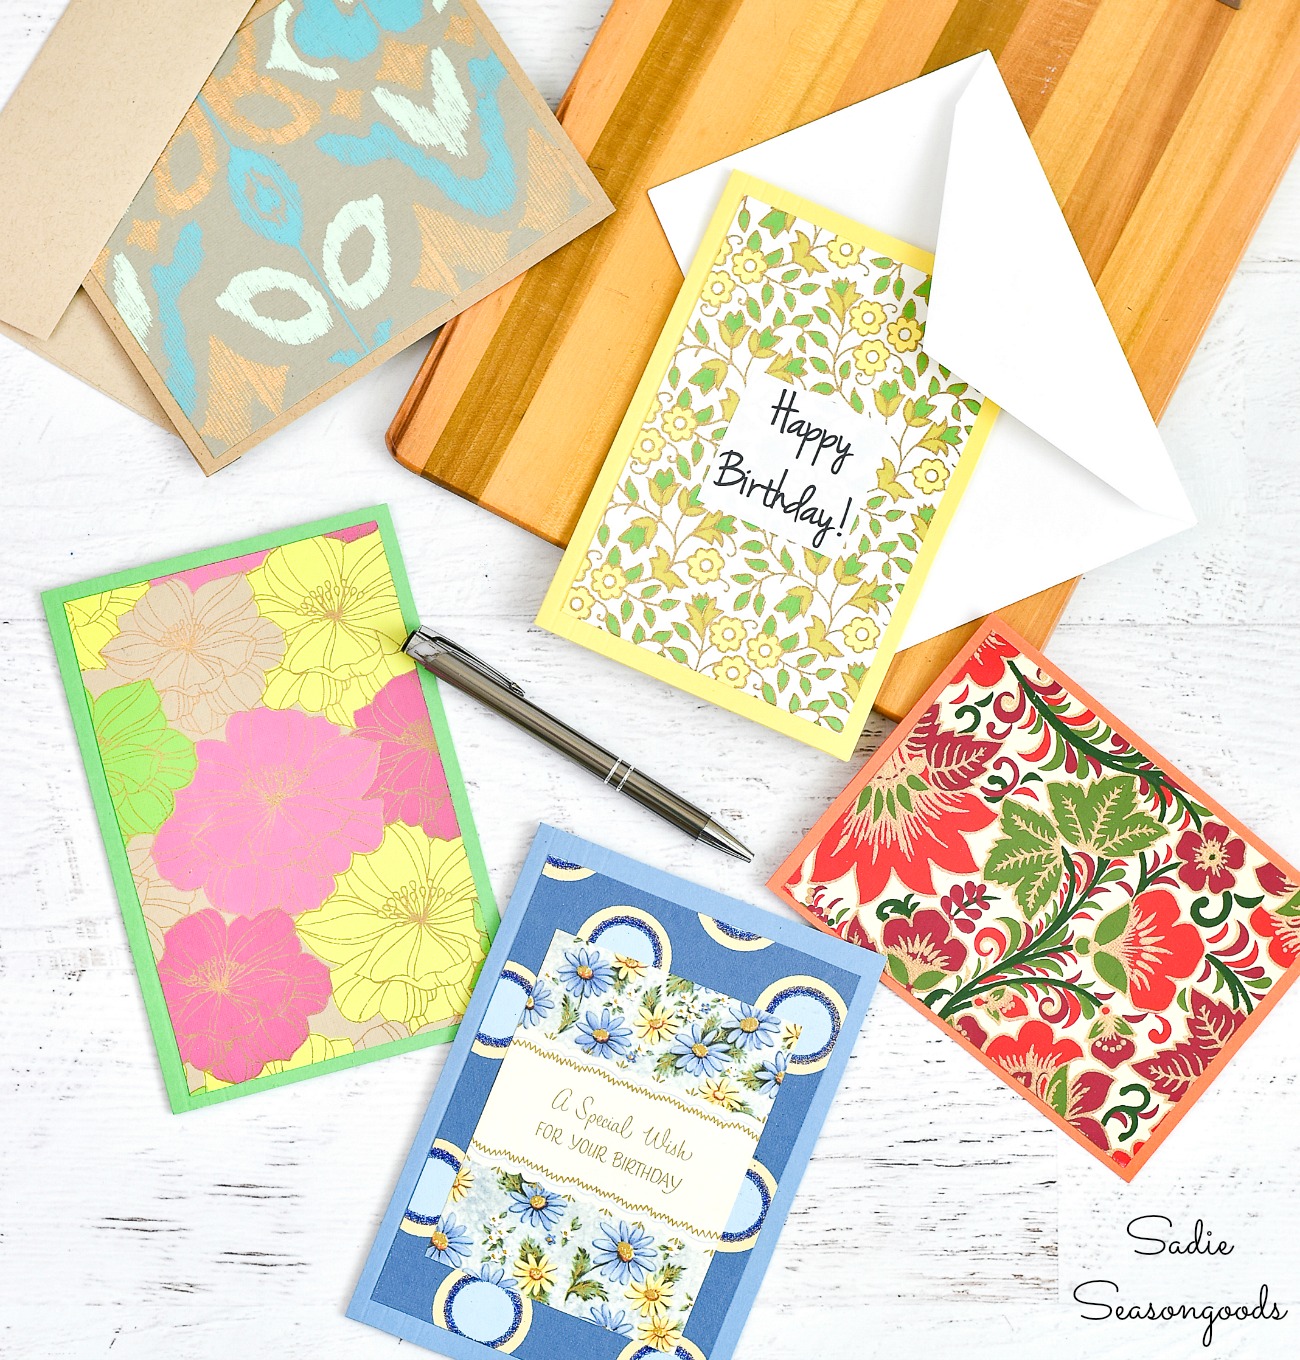 DIY Greeting Cards with File Folders and mulberry paper